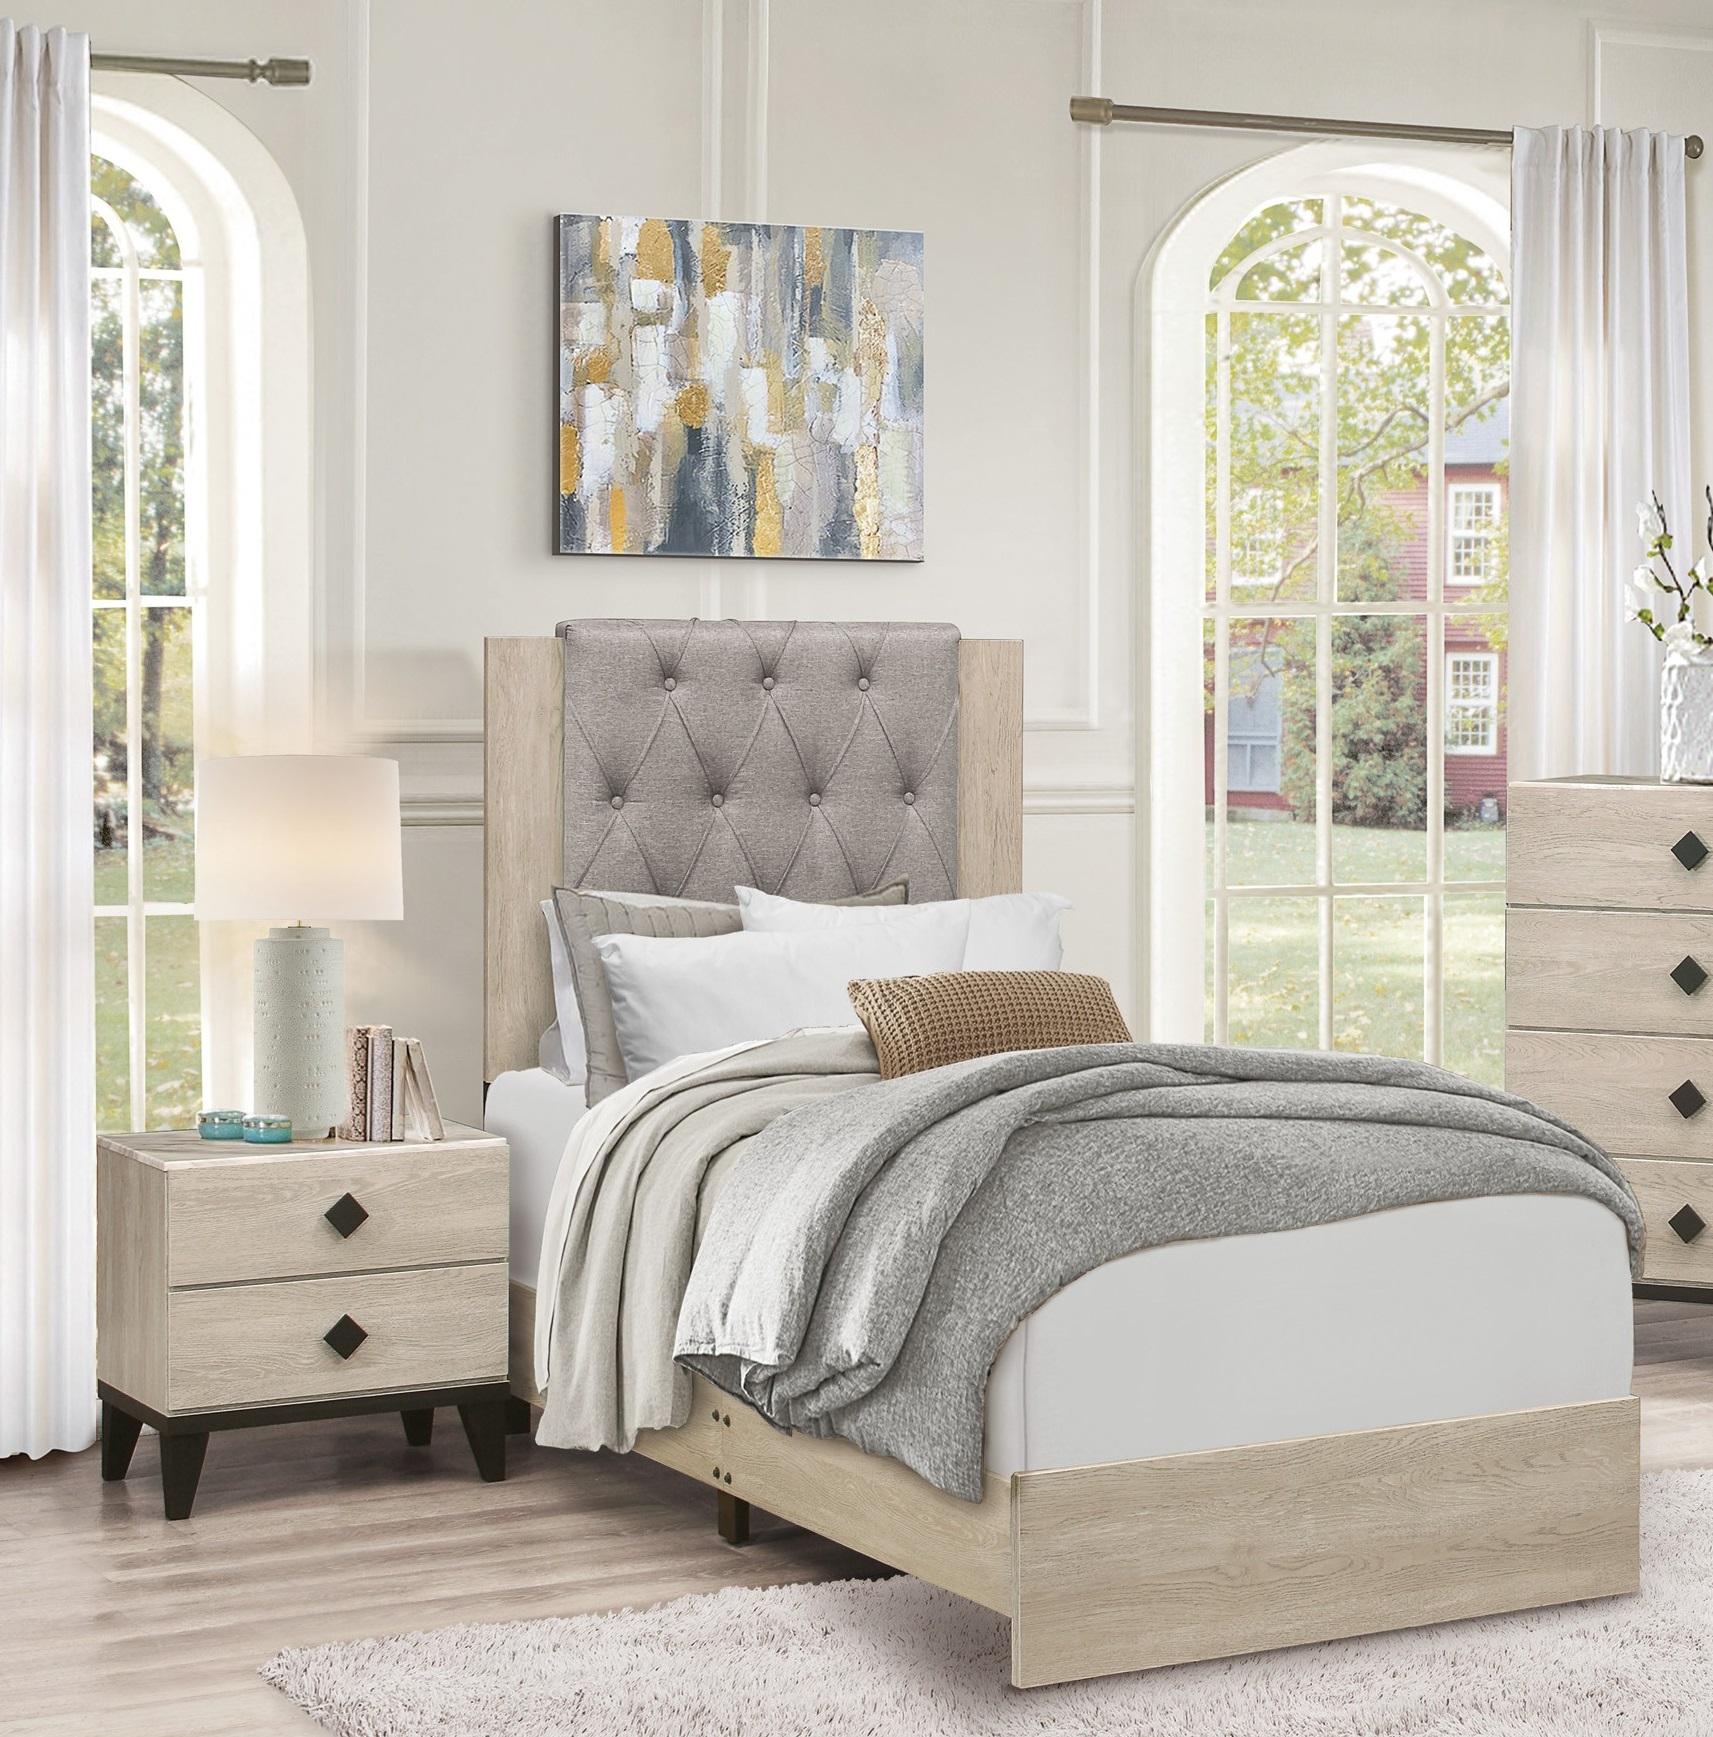 Modern Bedroom Set 1524T-1-3PC Whiting 1524T-1-3PC in Cream Polyester